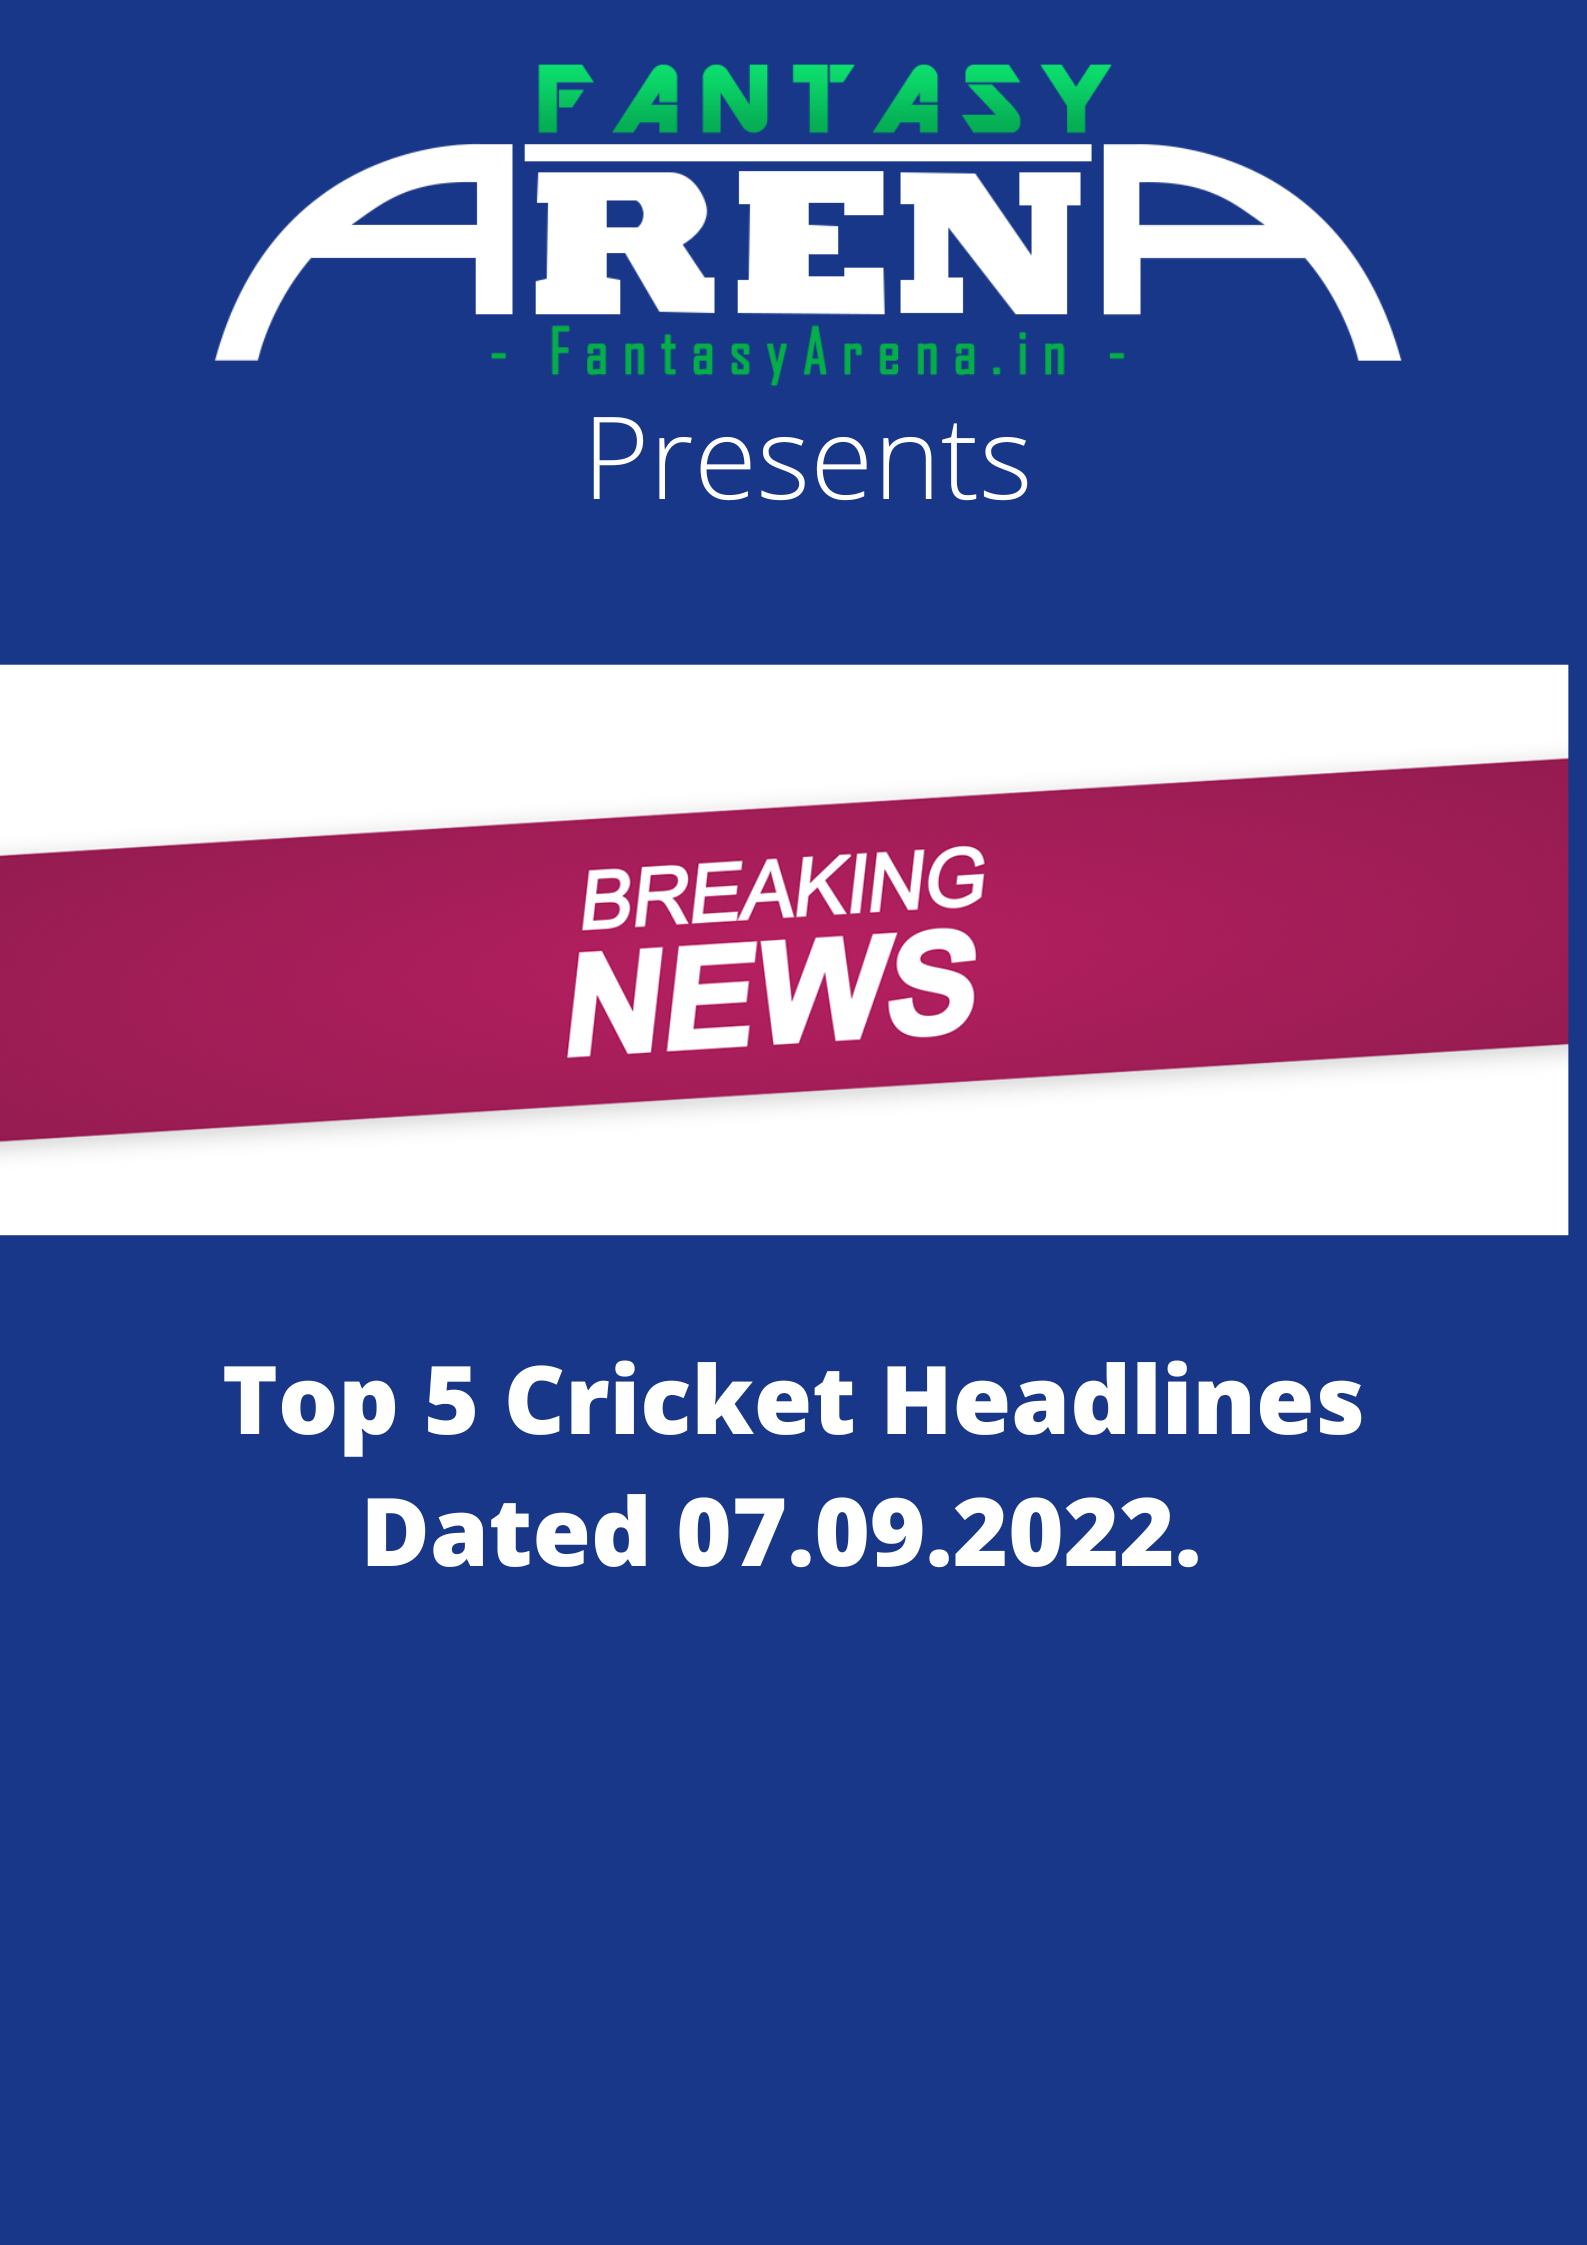 Top 5 Cricketing Stories of Today (07.09.2022).